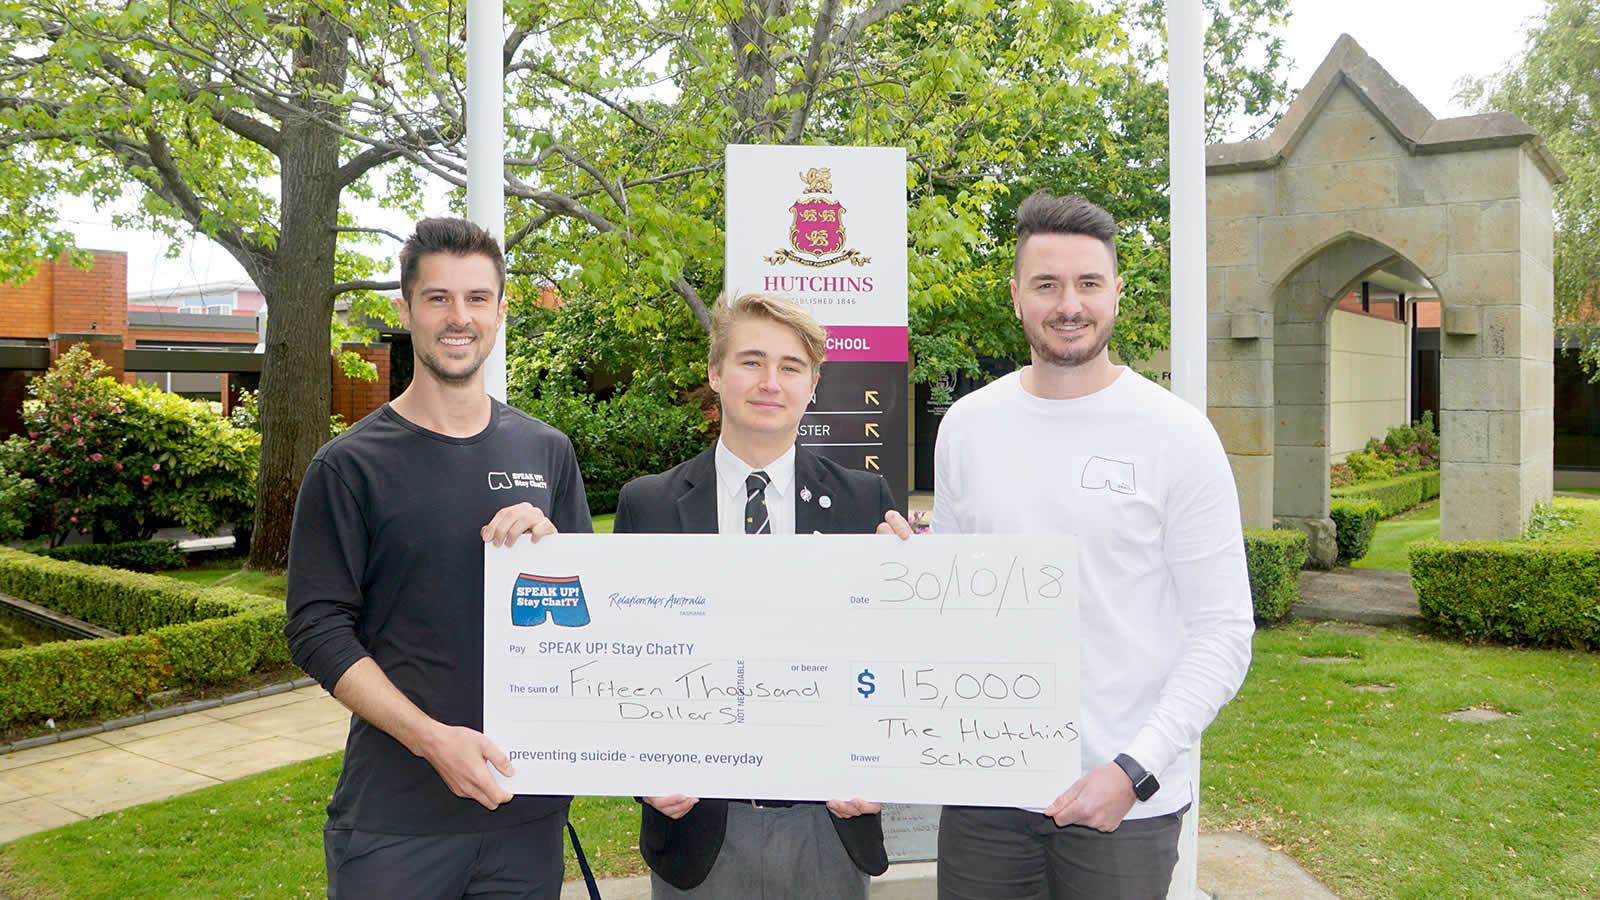 Fergus Charles (School Captain) presenting the cheque to James Rice (’05) and Mitch McPherson from SPEAK UP! Stay ChatTY.